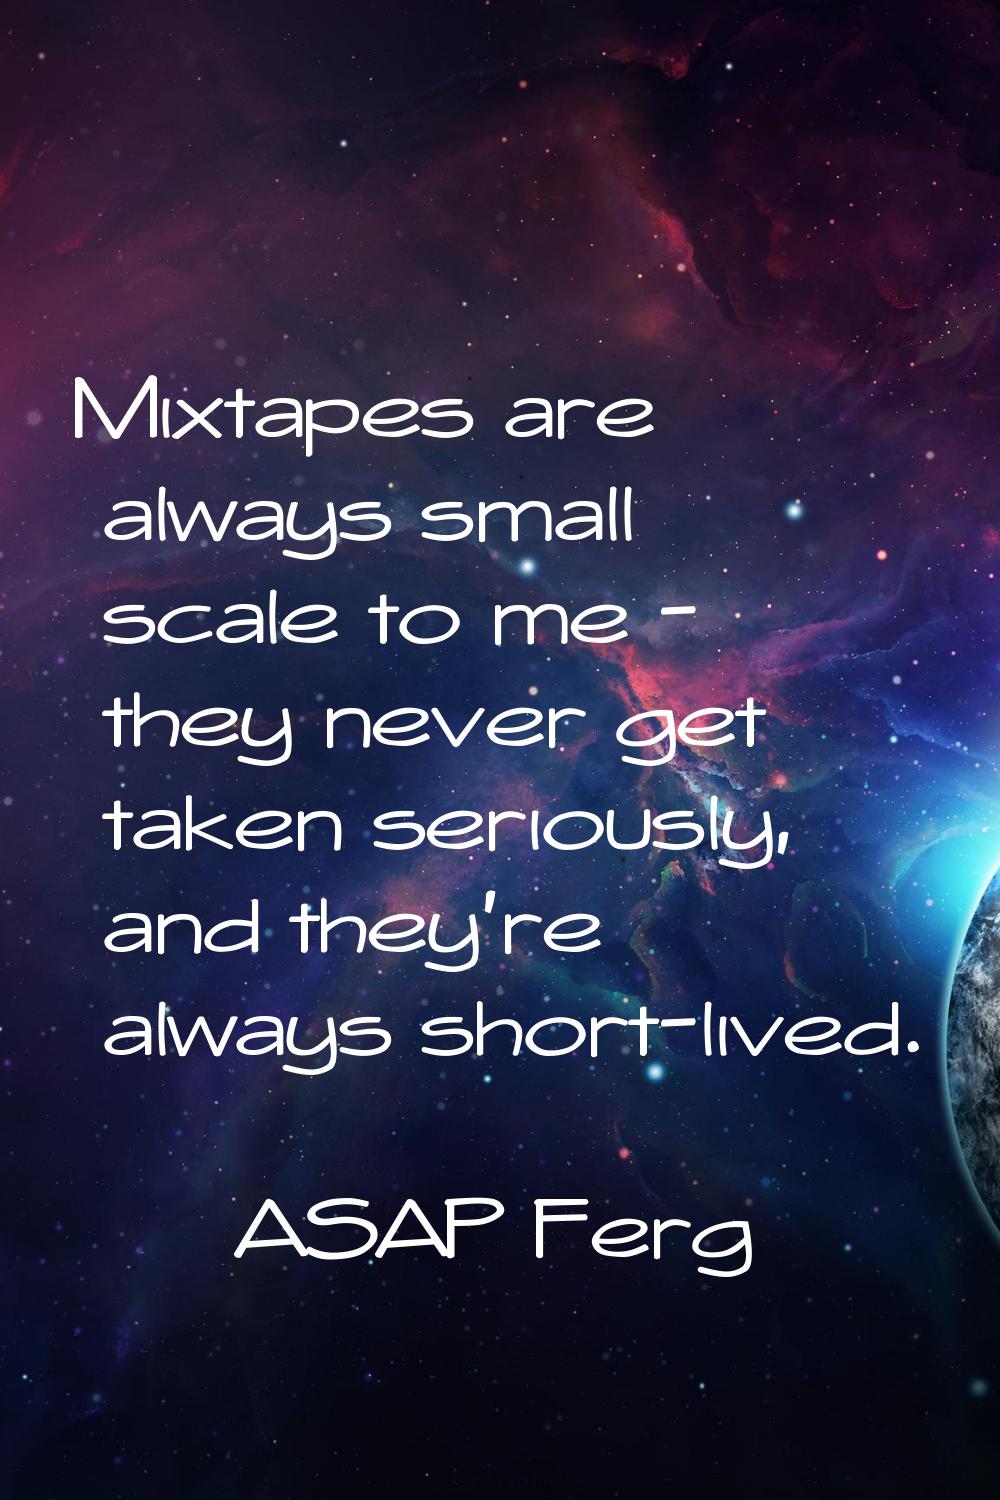 Mixtapes are always small scale to me - they never get taken seriously, and they're always short-li